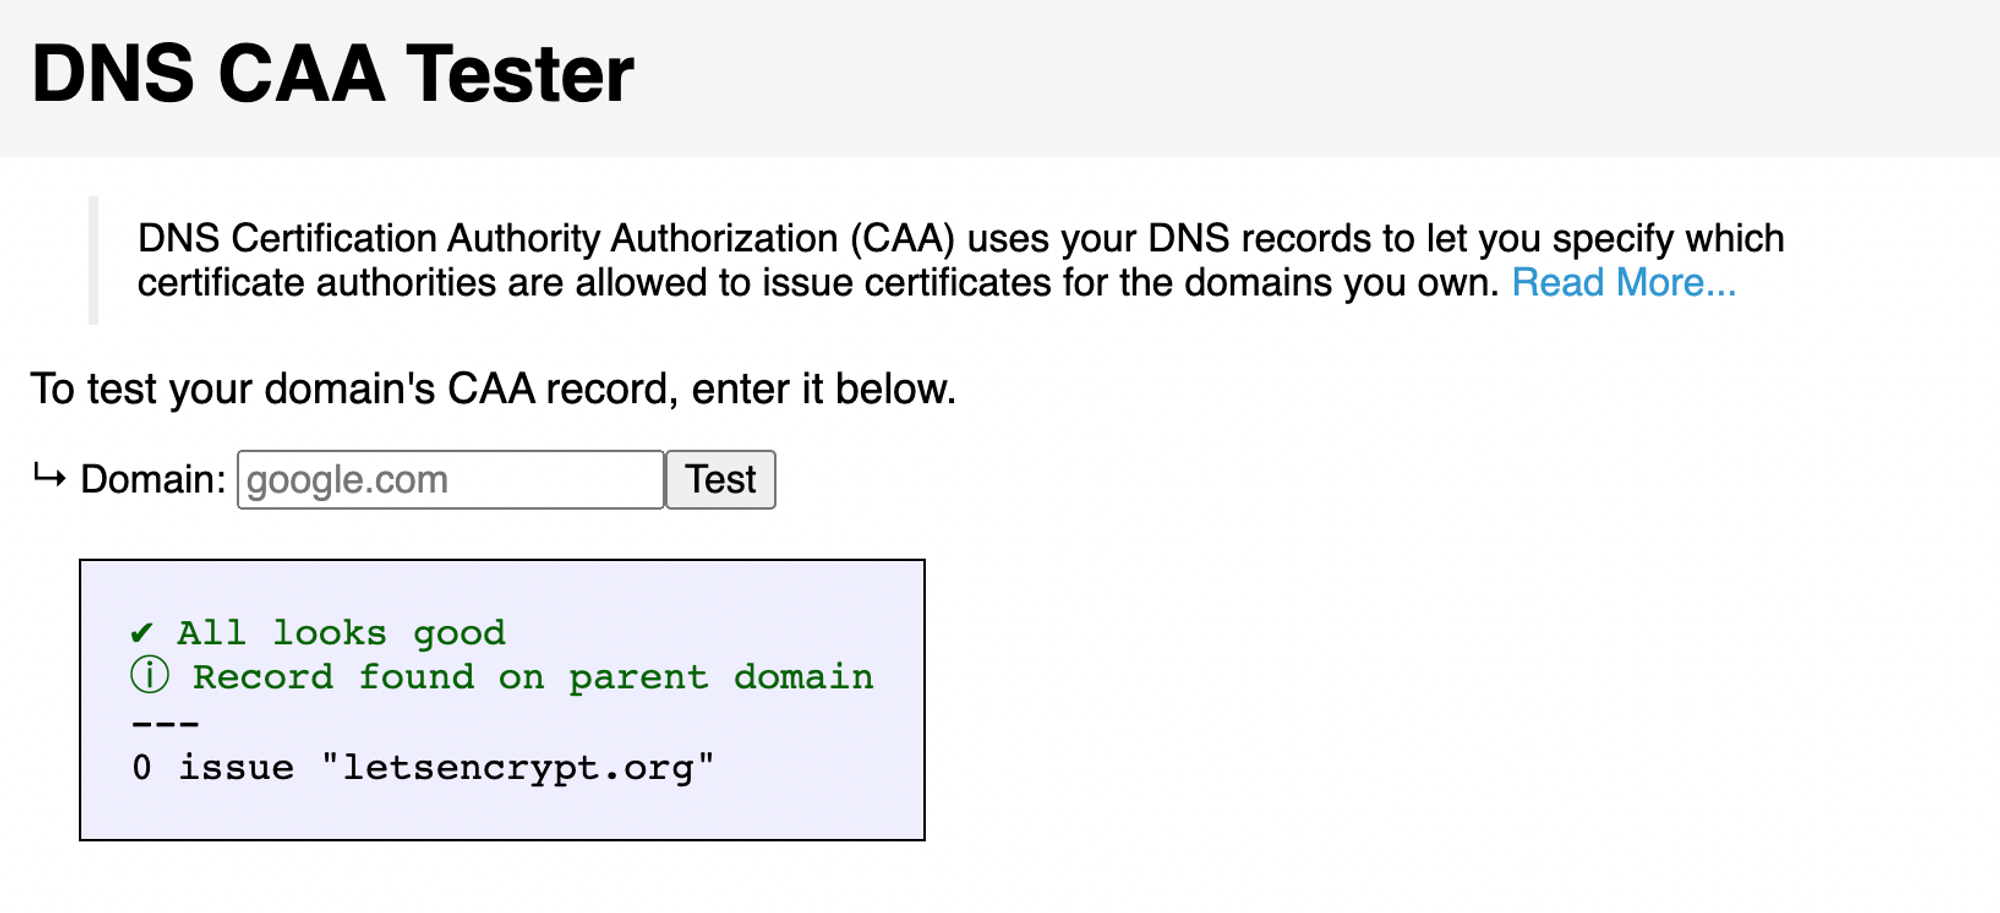 Your DNS seetings are missing the digicert.com CAA record